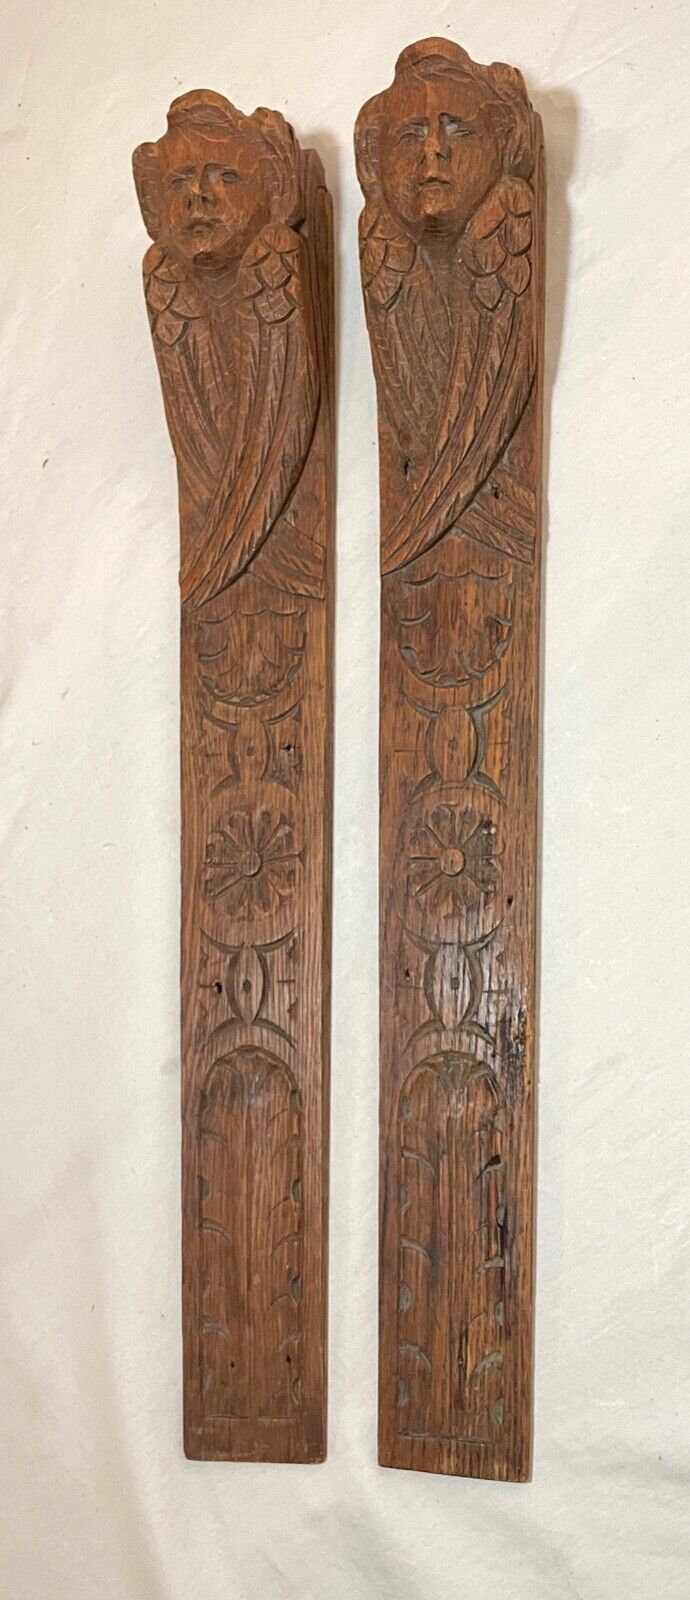 pair Antique hand carved wood architectural salvage cherub wall sculpture panel